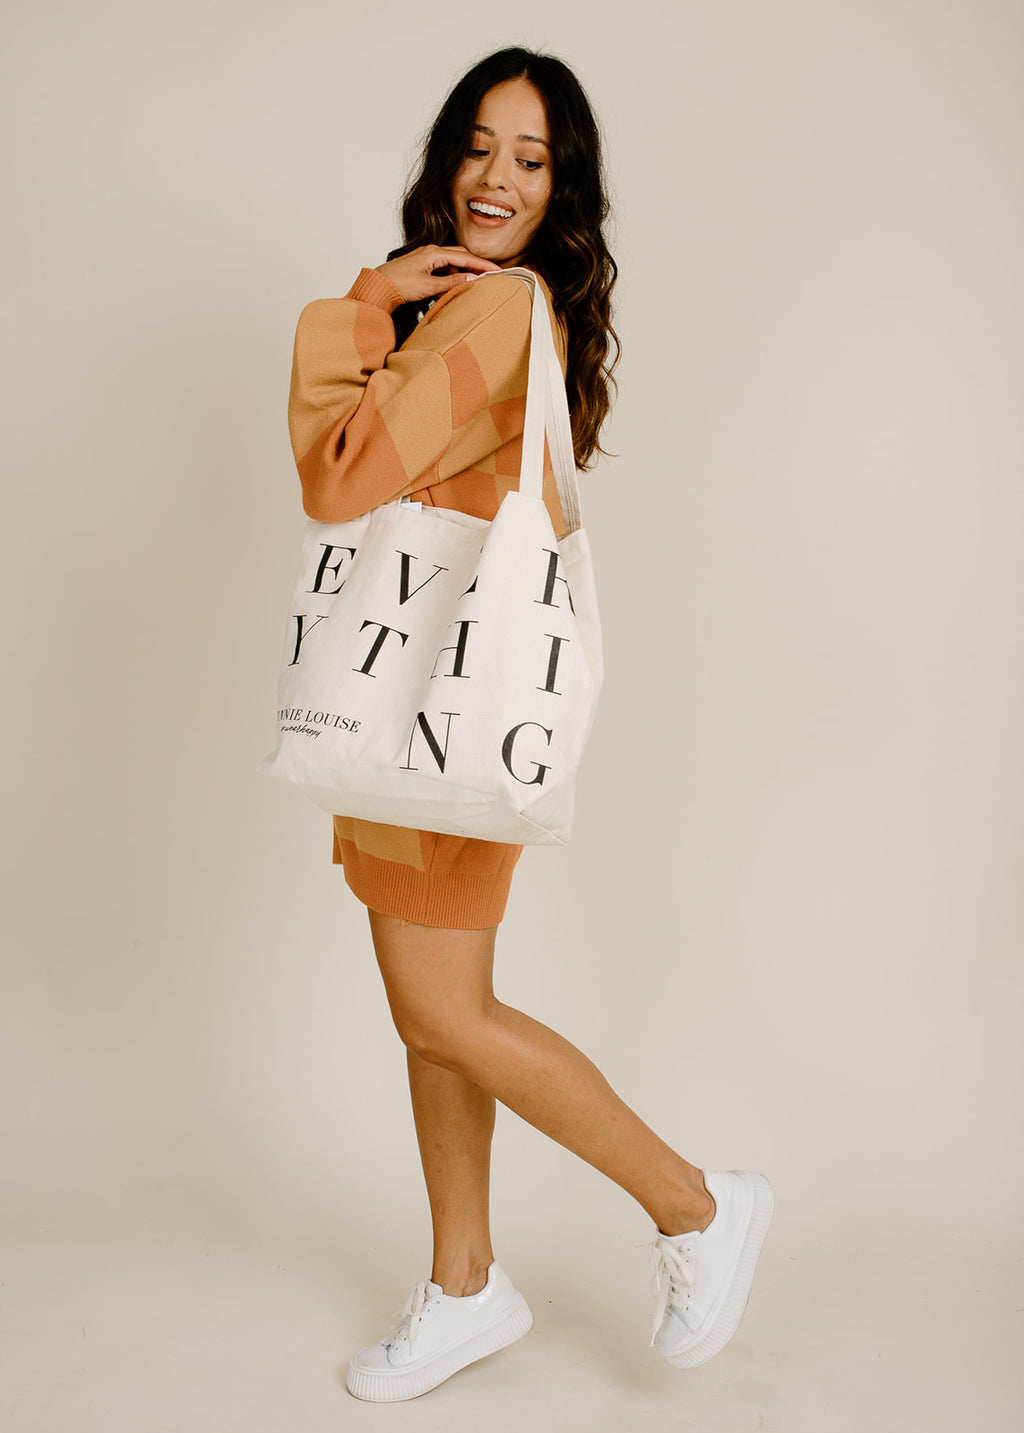 Canvas Tote Bag - Everything VL – Vinnie Louise